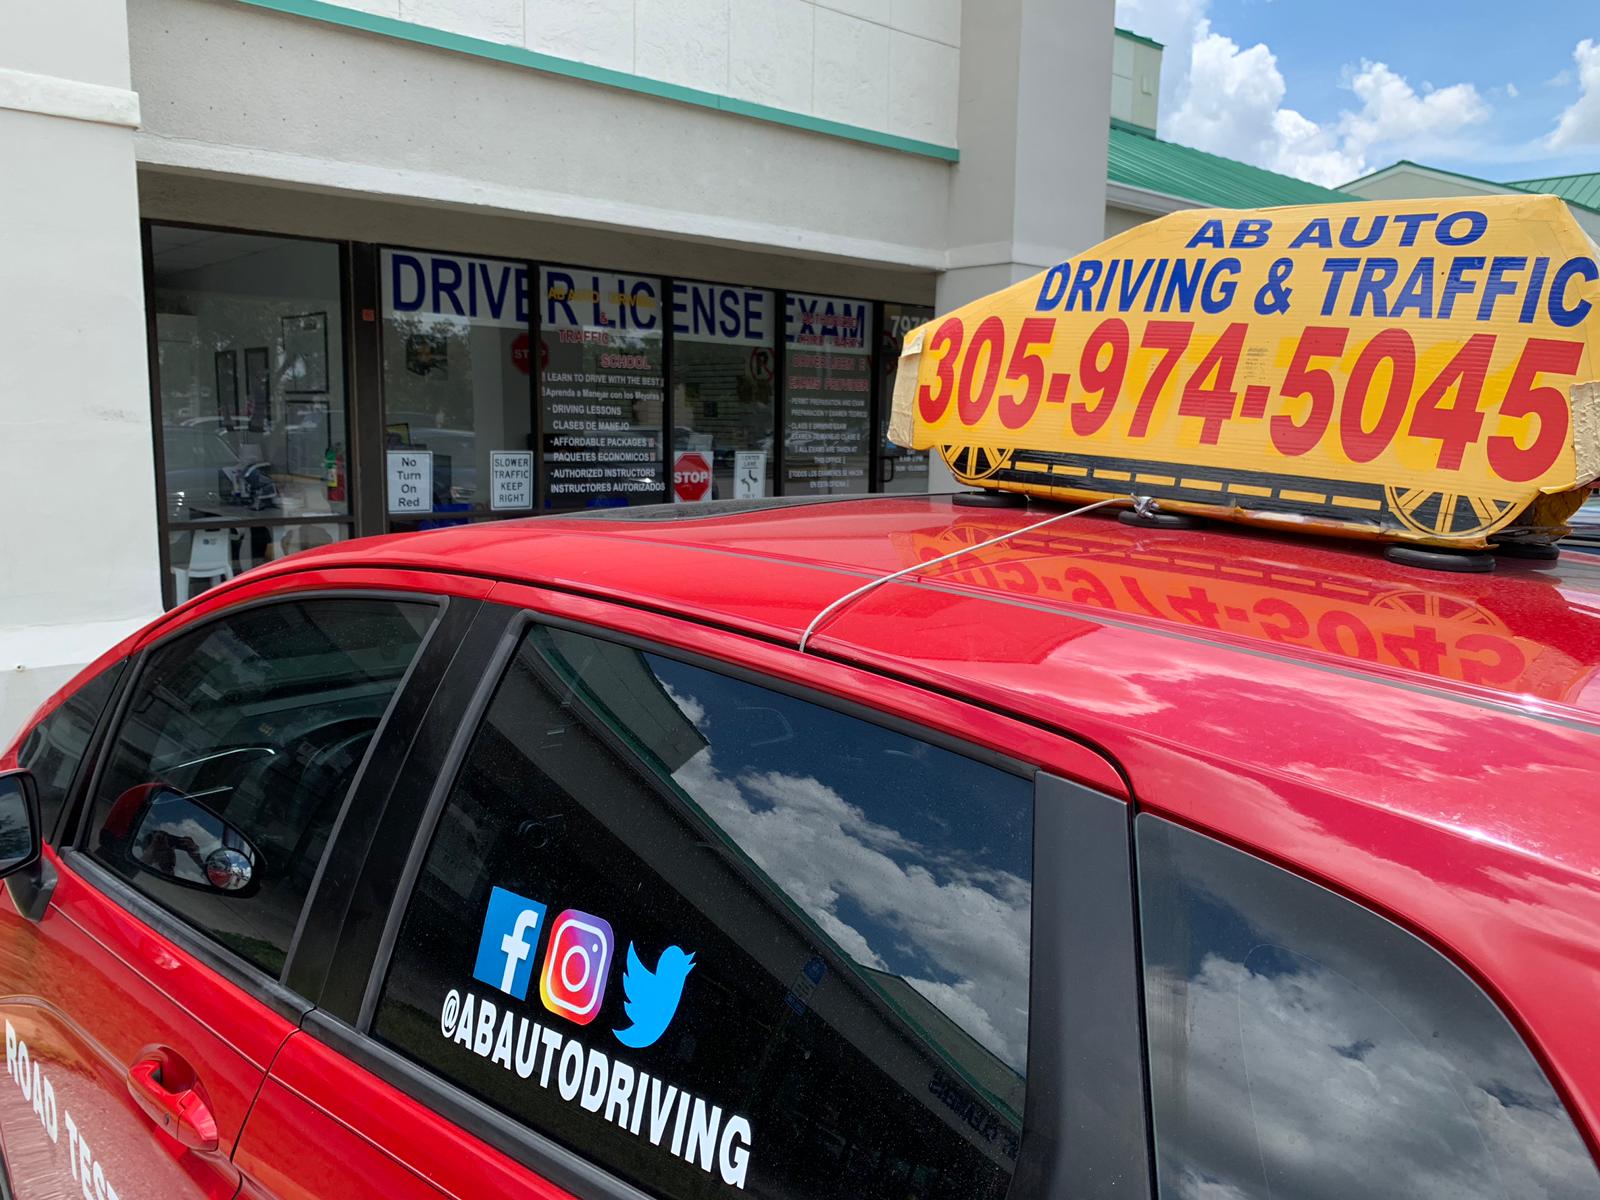 AB AUTO Driving and Traffic School and Driver License Testing Center